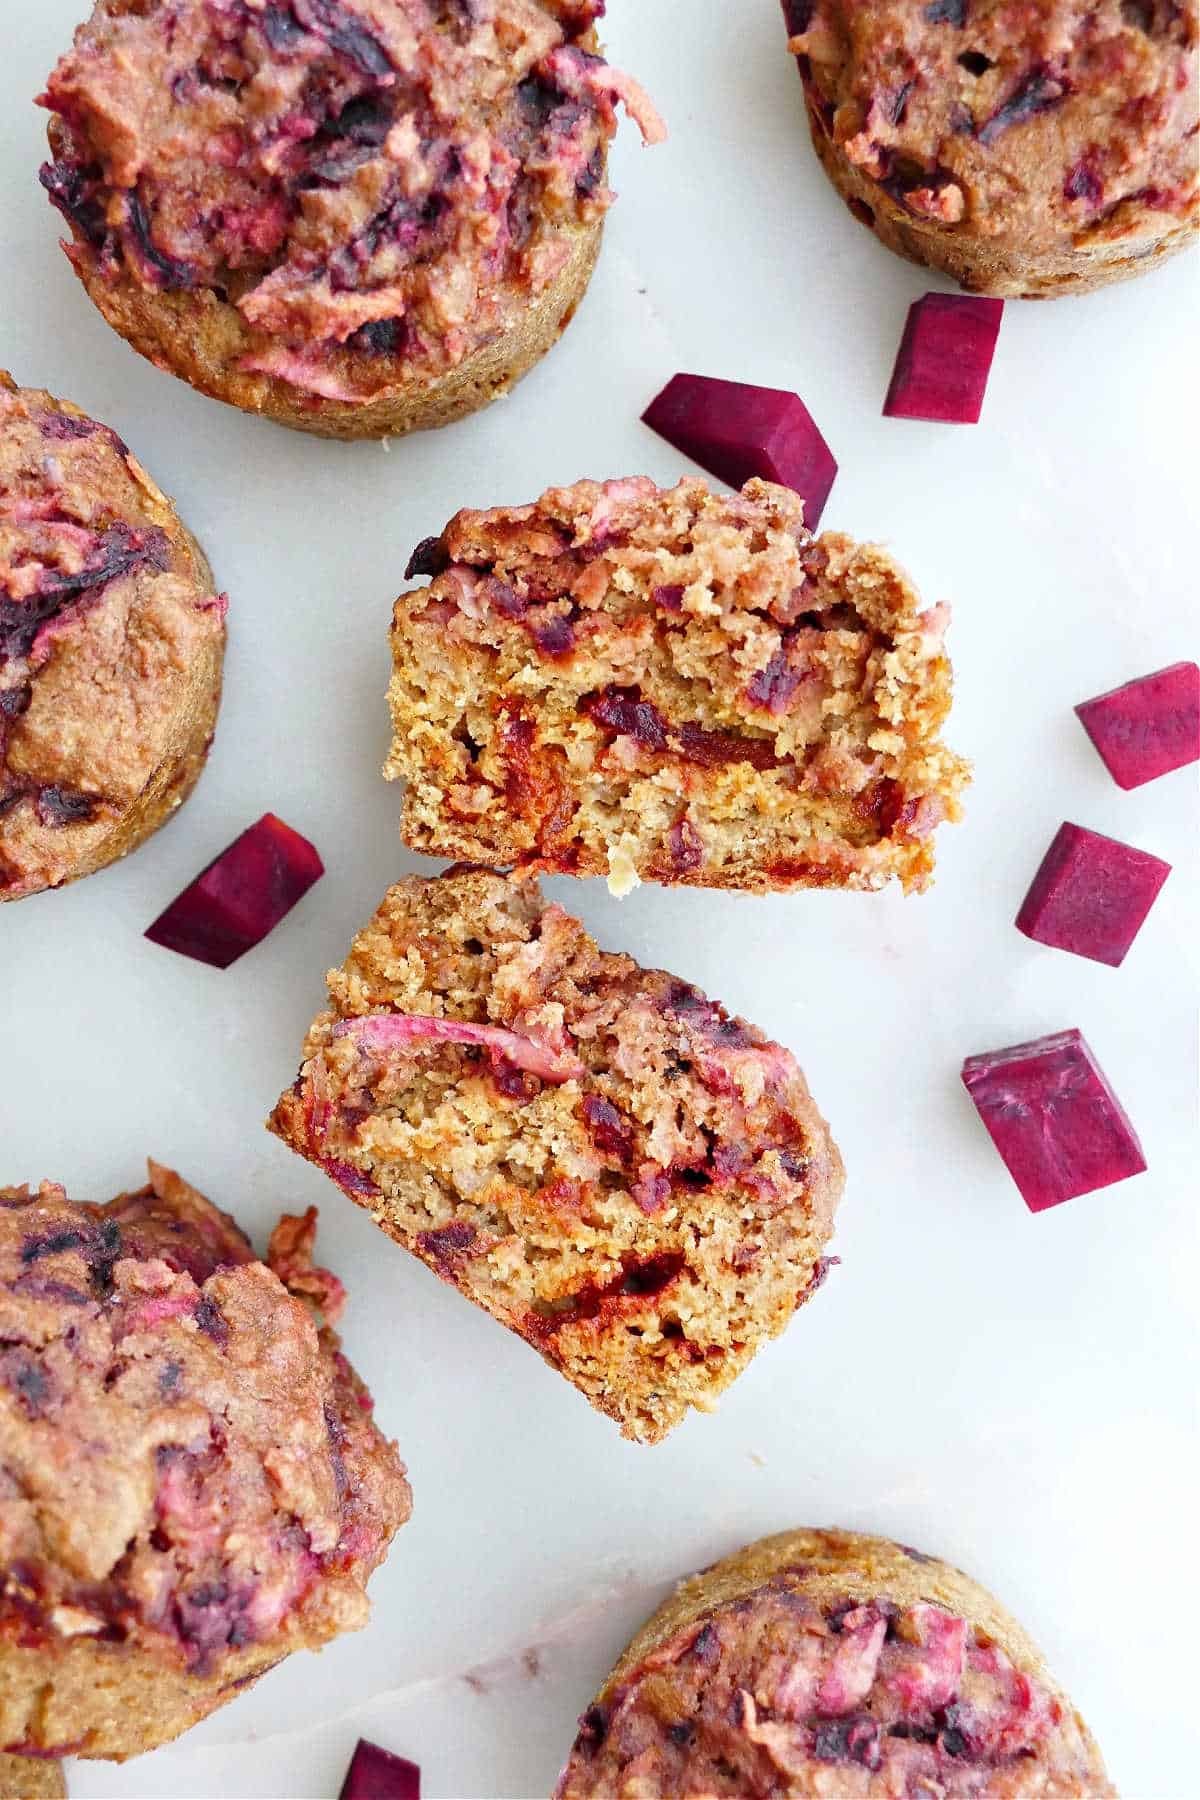 a beet muffin sliced in half on a counter next to other muffins